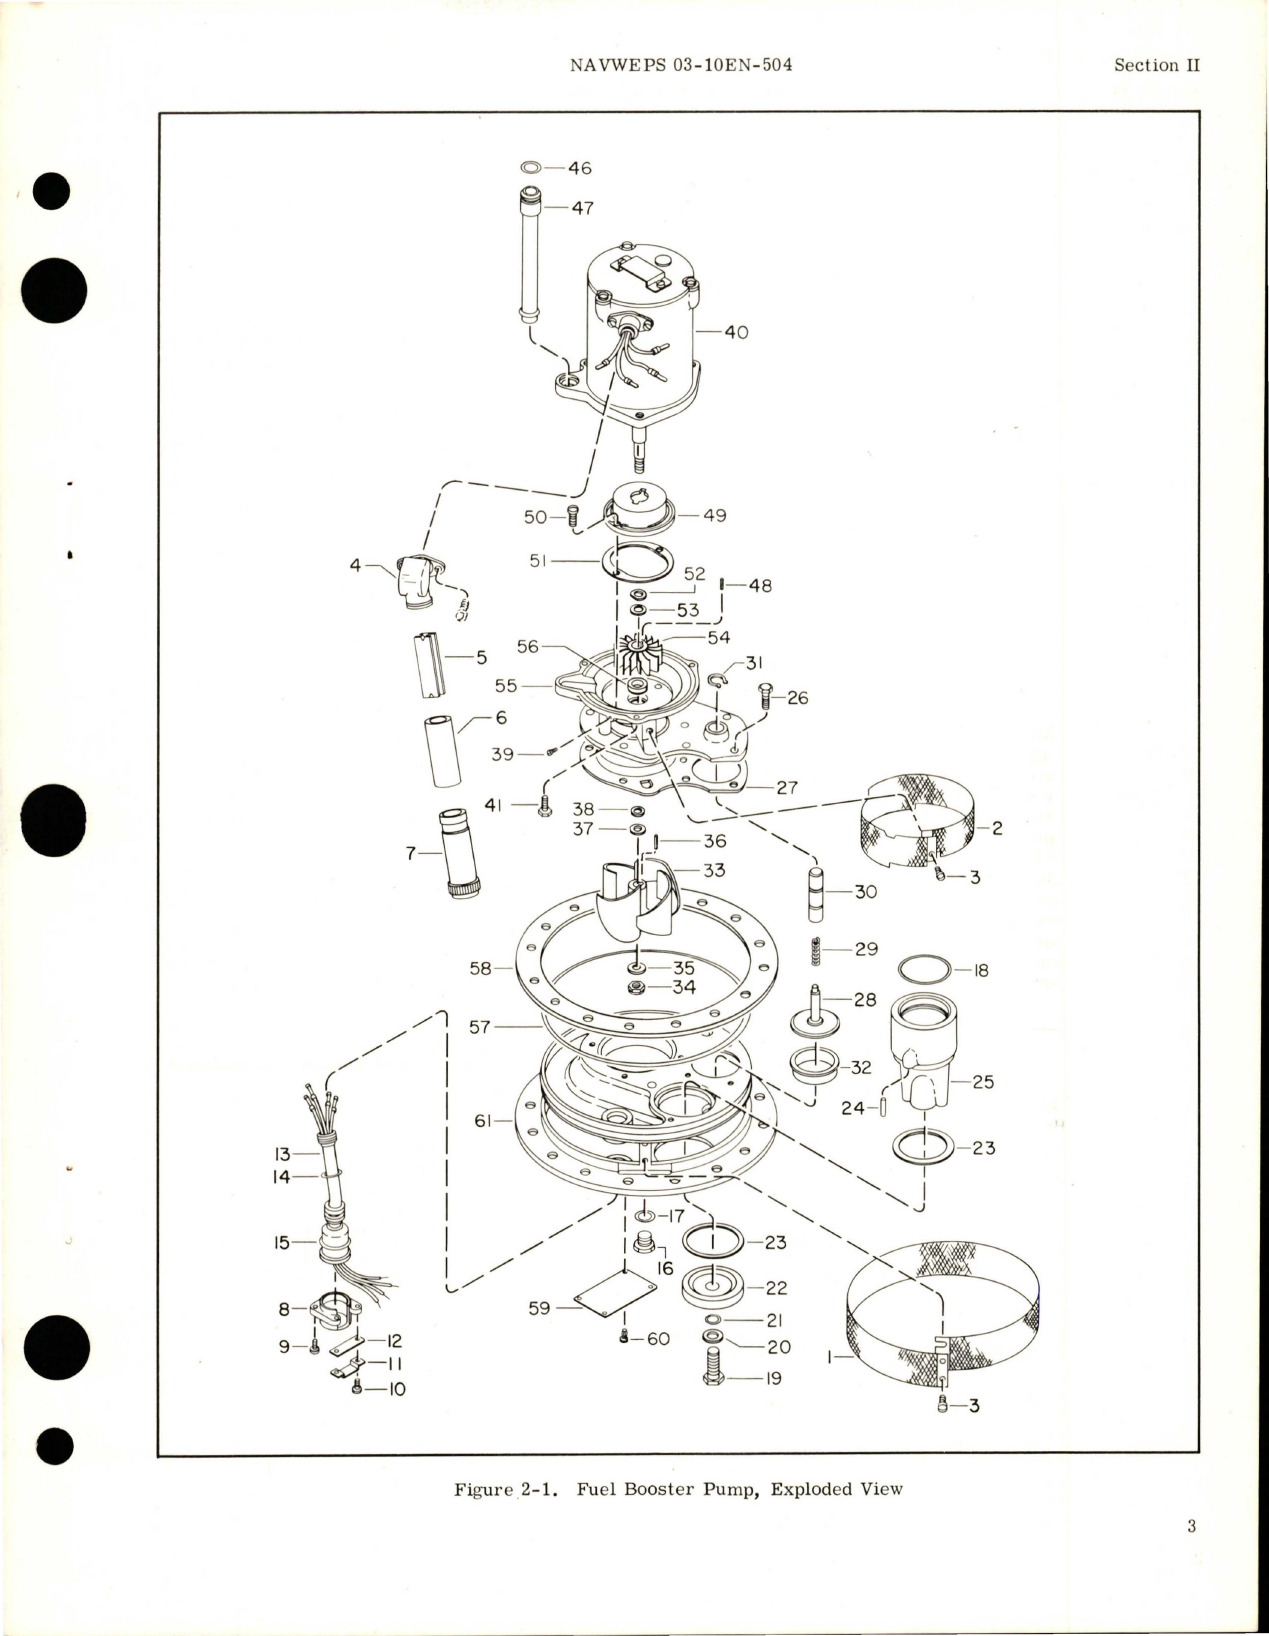 Sample page 5 from AirCorps Library document: Overhaul Instructions for Fuel Booster Pump - Models 64-1063-1, 64-1063-11, and 641063-11A